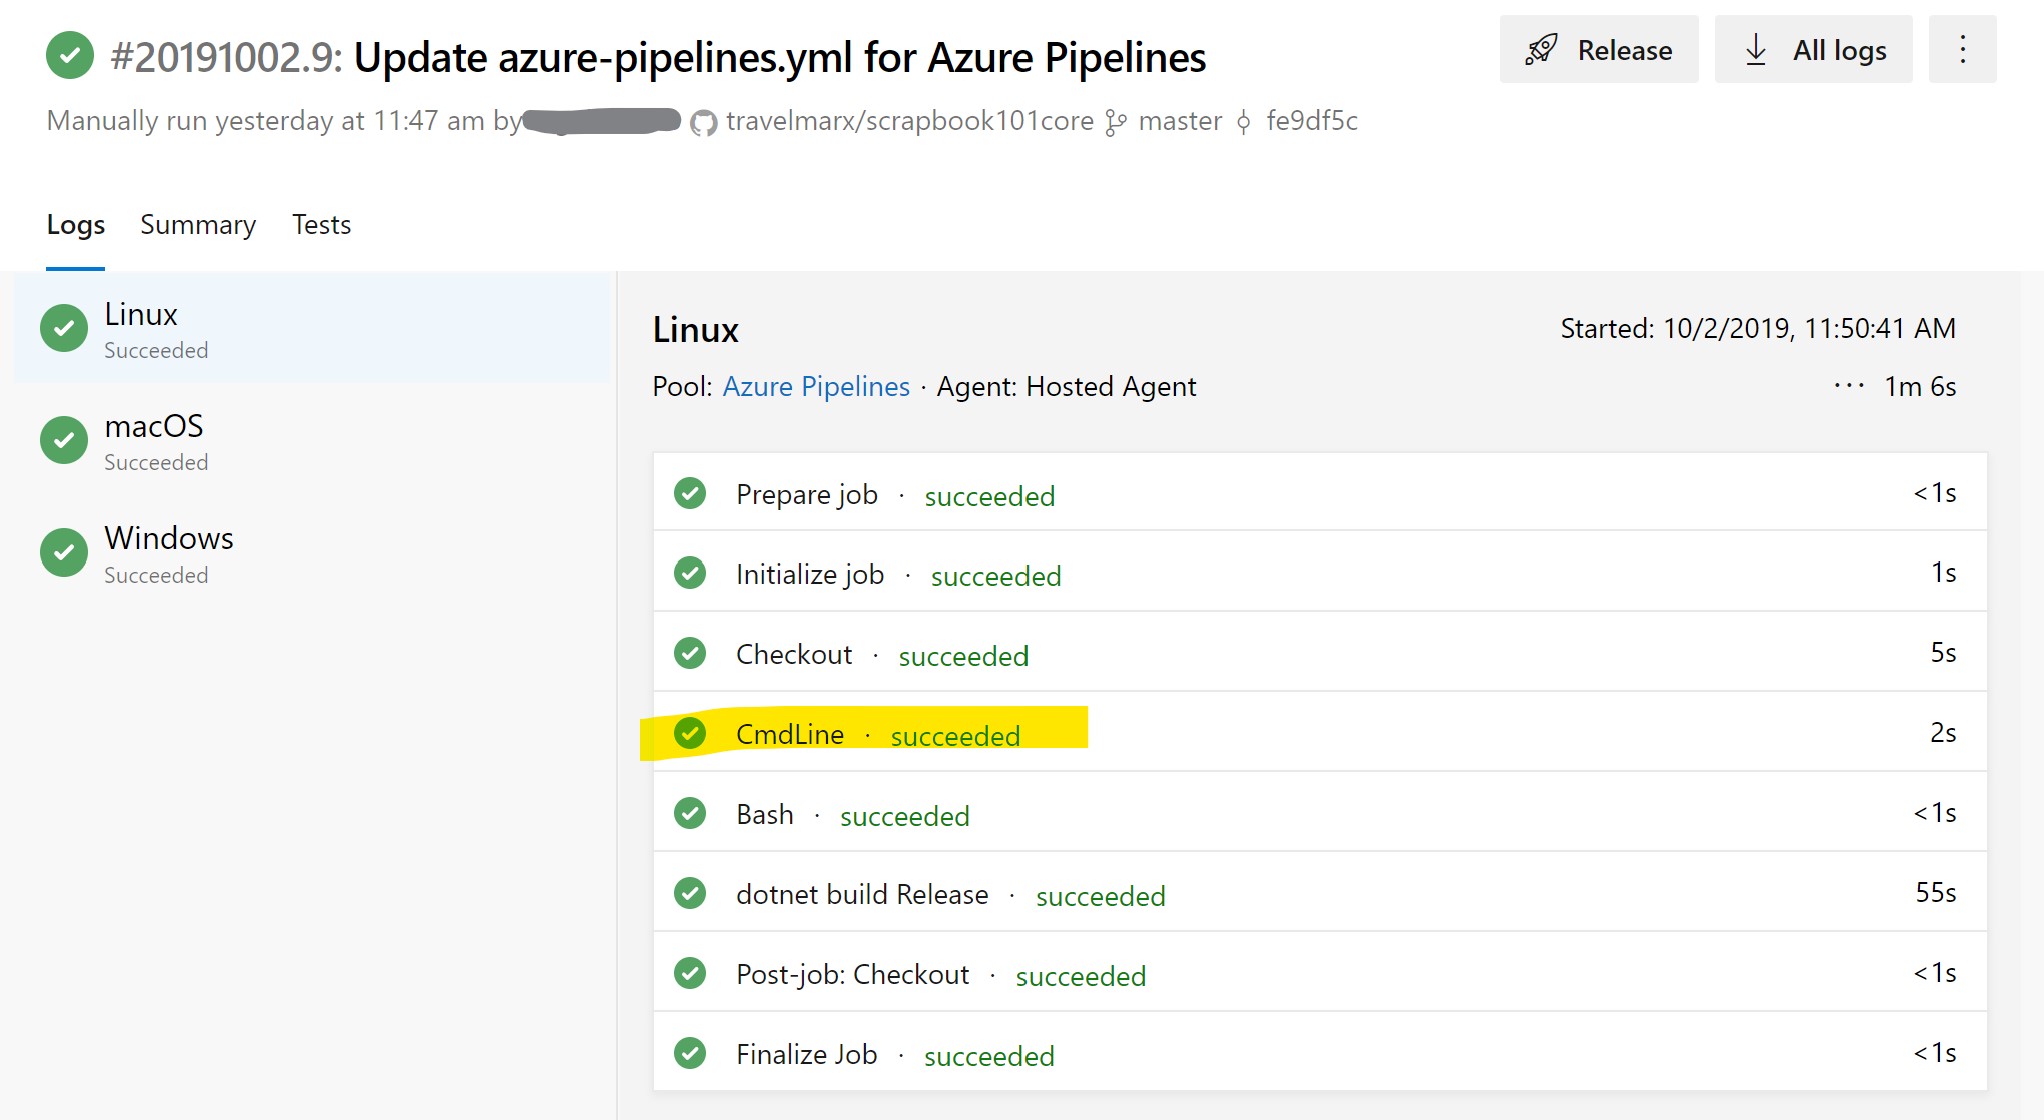 Build pipeline example with three agents